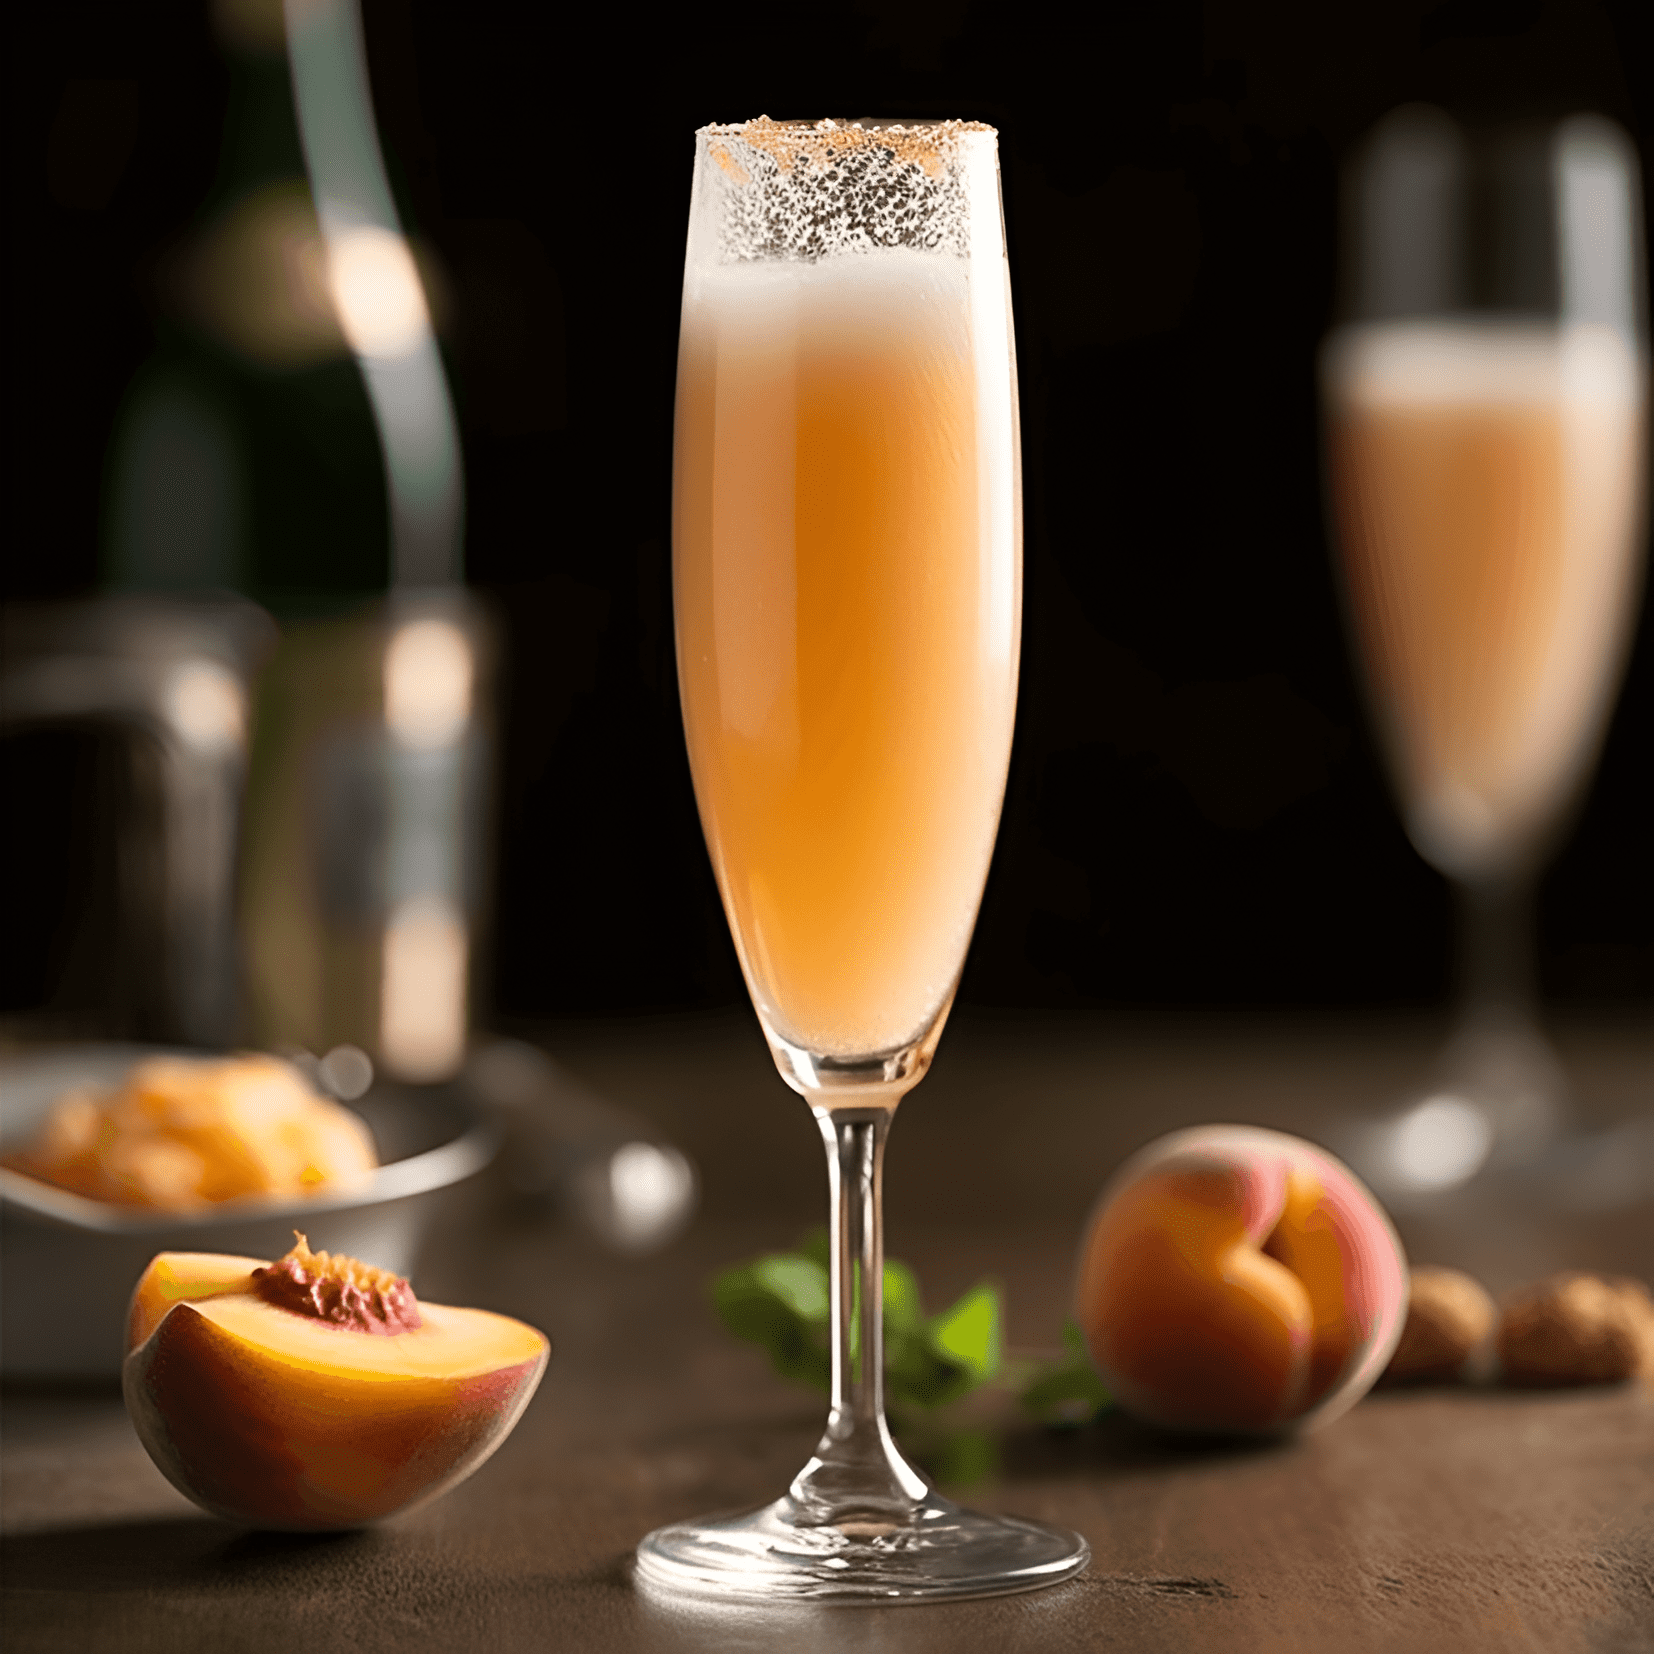 The Peach Bellini has a refreshing, fruity, and slightly sweet taste. The combination of peach puree and Prosecco creates a light, bubbly, and smooth texture.